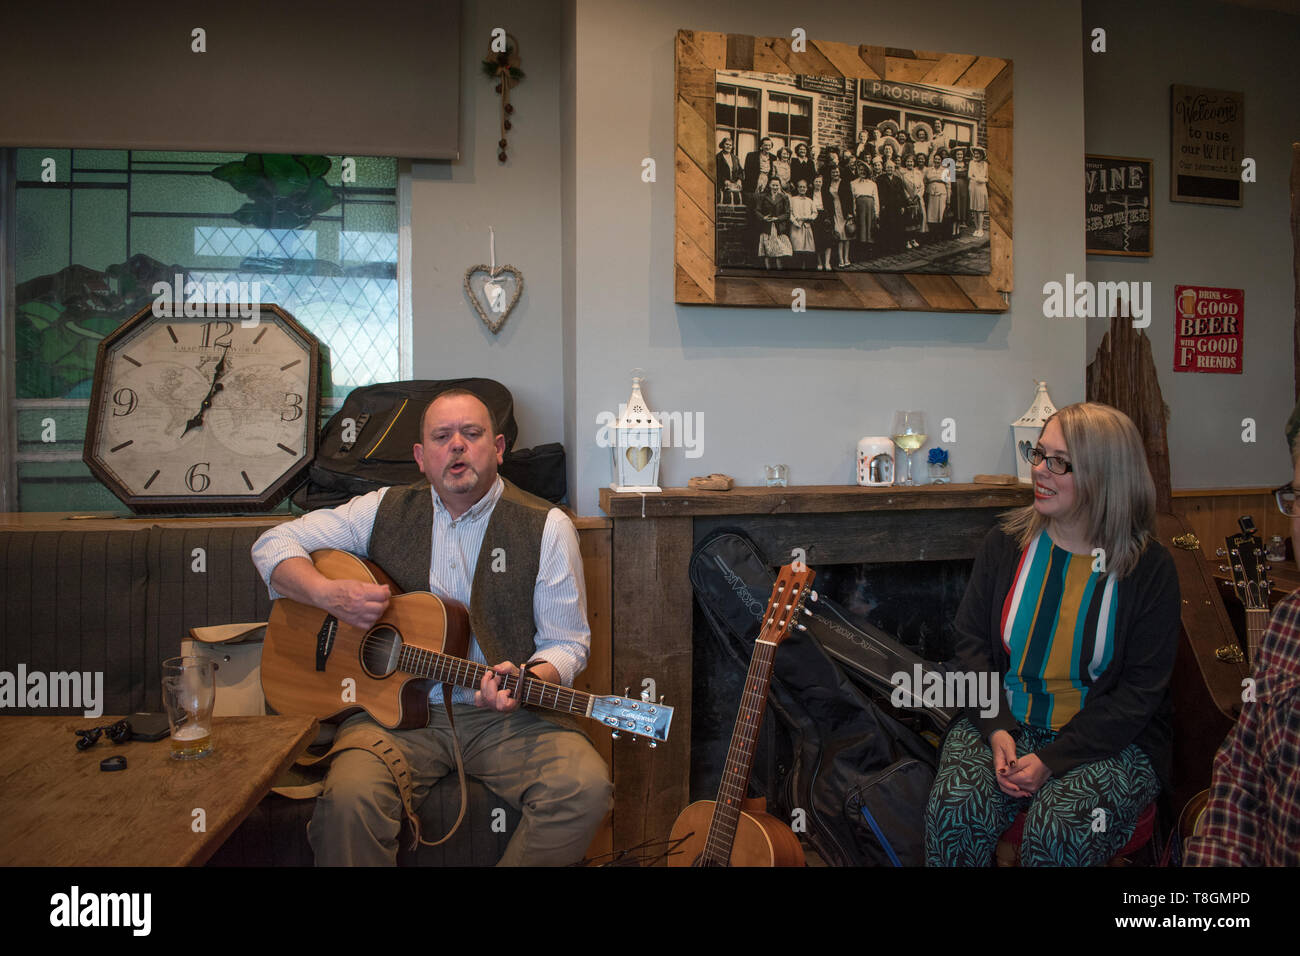 Folk singing in Uk English pub. Group playing for fun, its their hobby. 2019 UK. Halifax Yorkshire HOMER SYKES Stock Photo